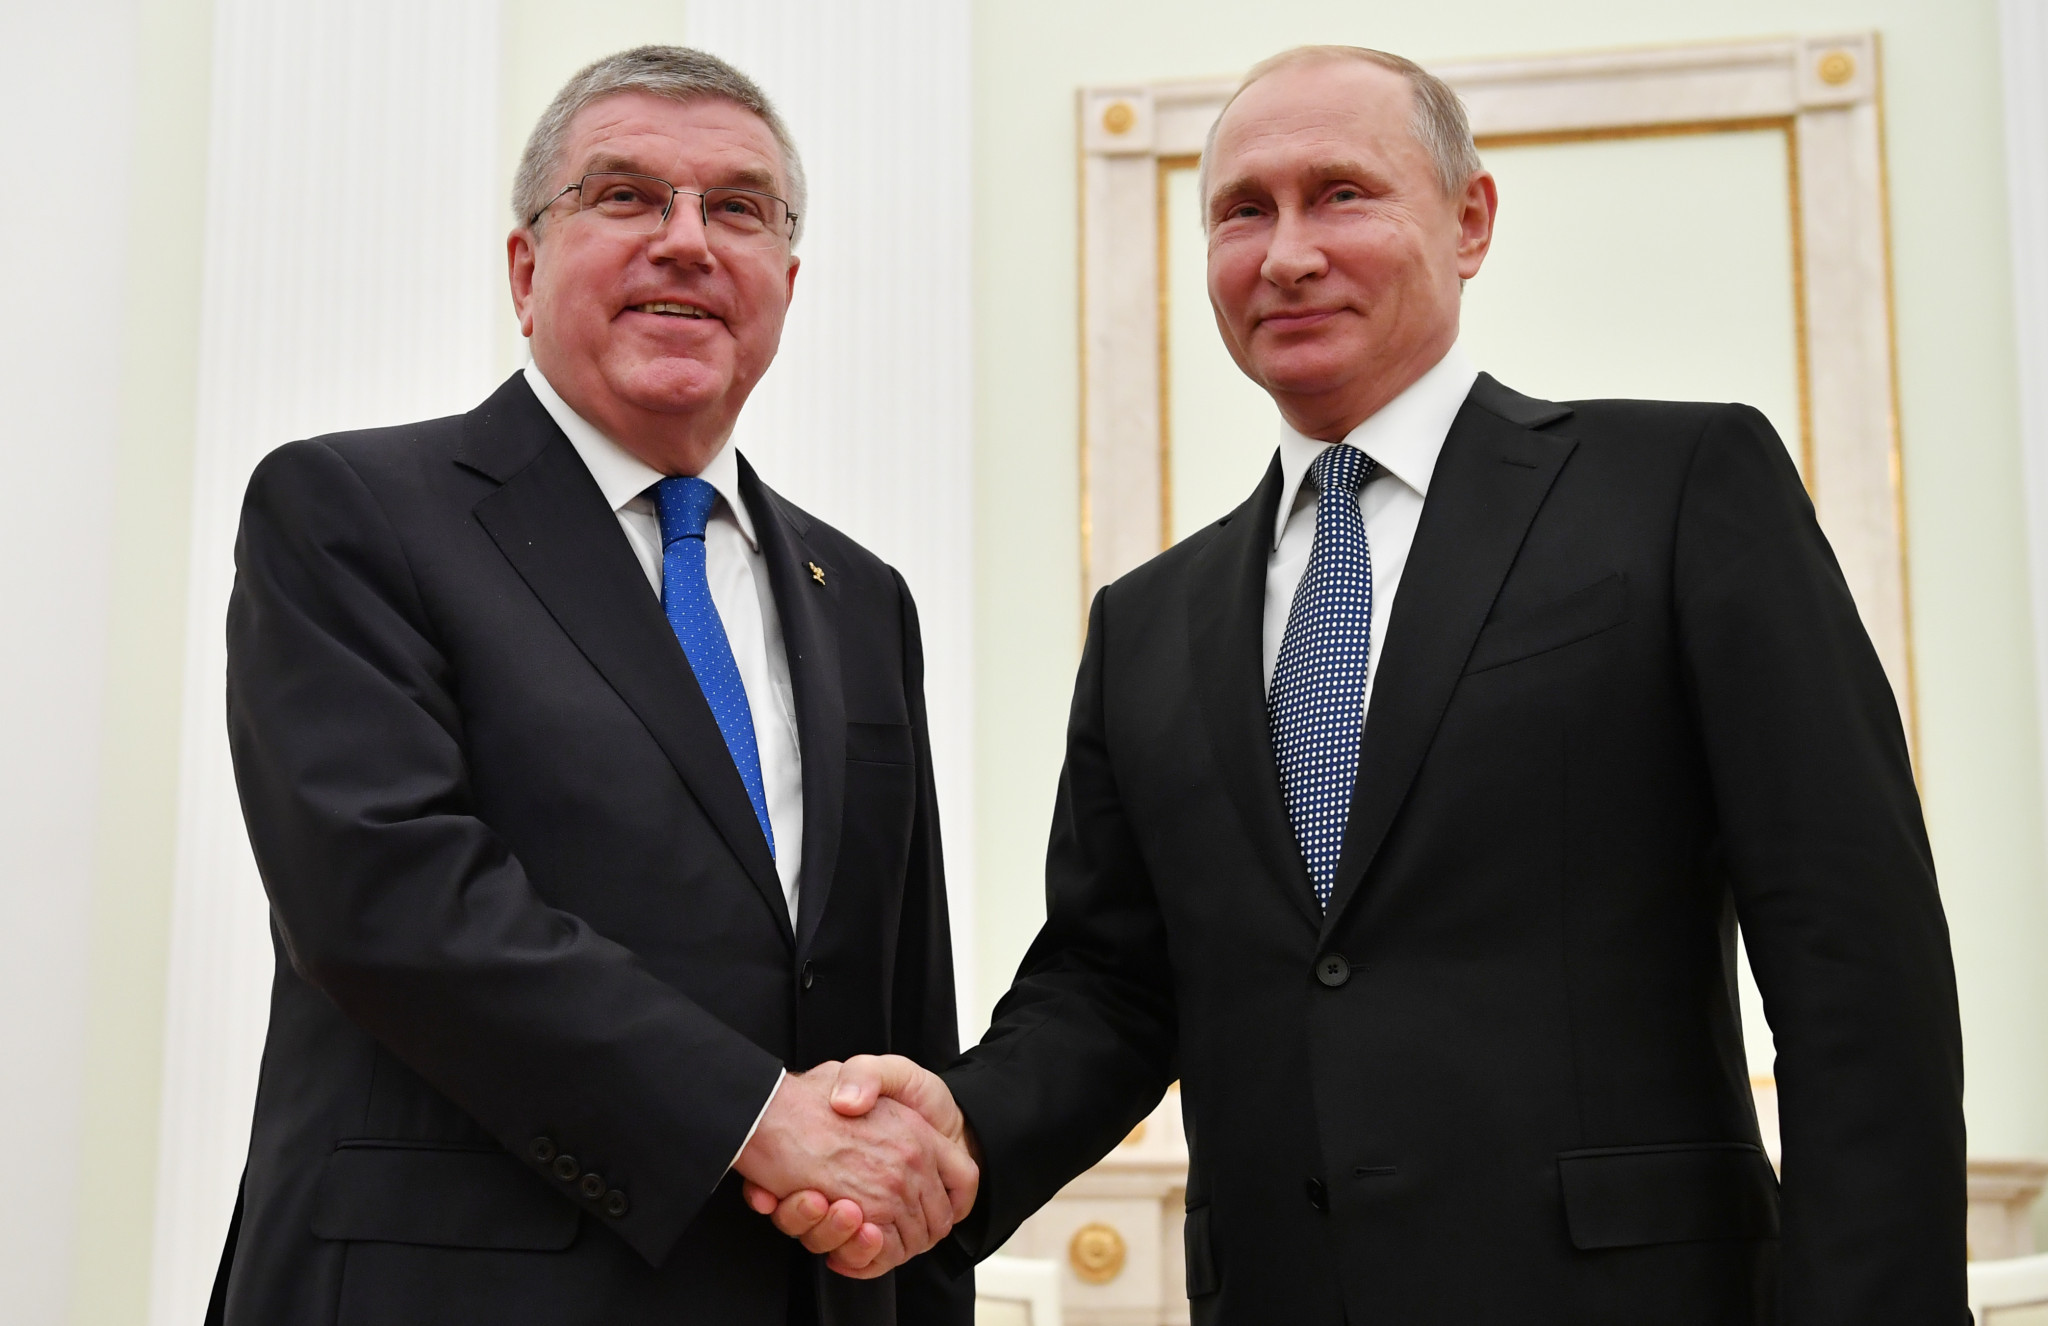 IOC President Thomas Bach and Russian President Vladimir Putin are set to attend the Minsk 2019 Closing Ceremony ©Getty Images